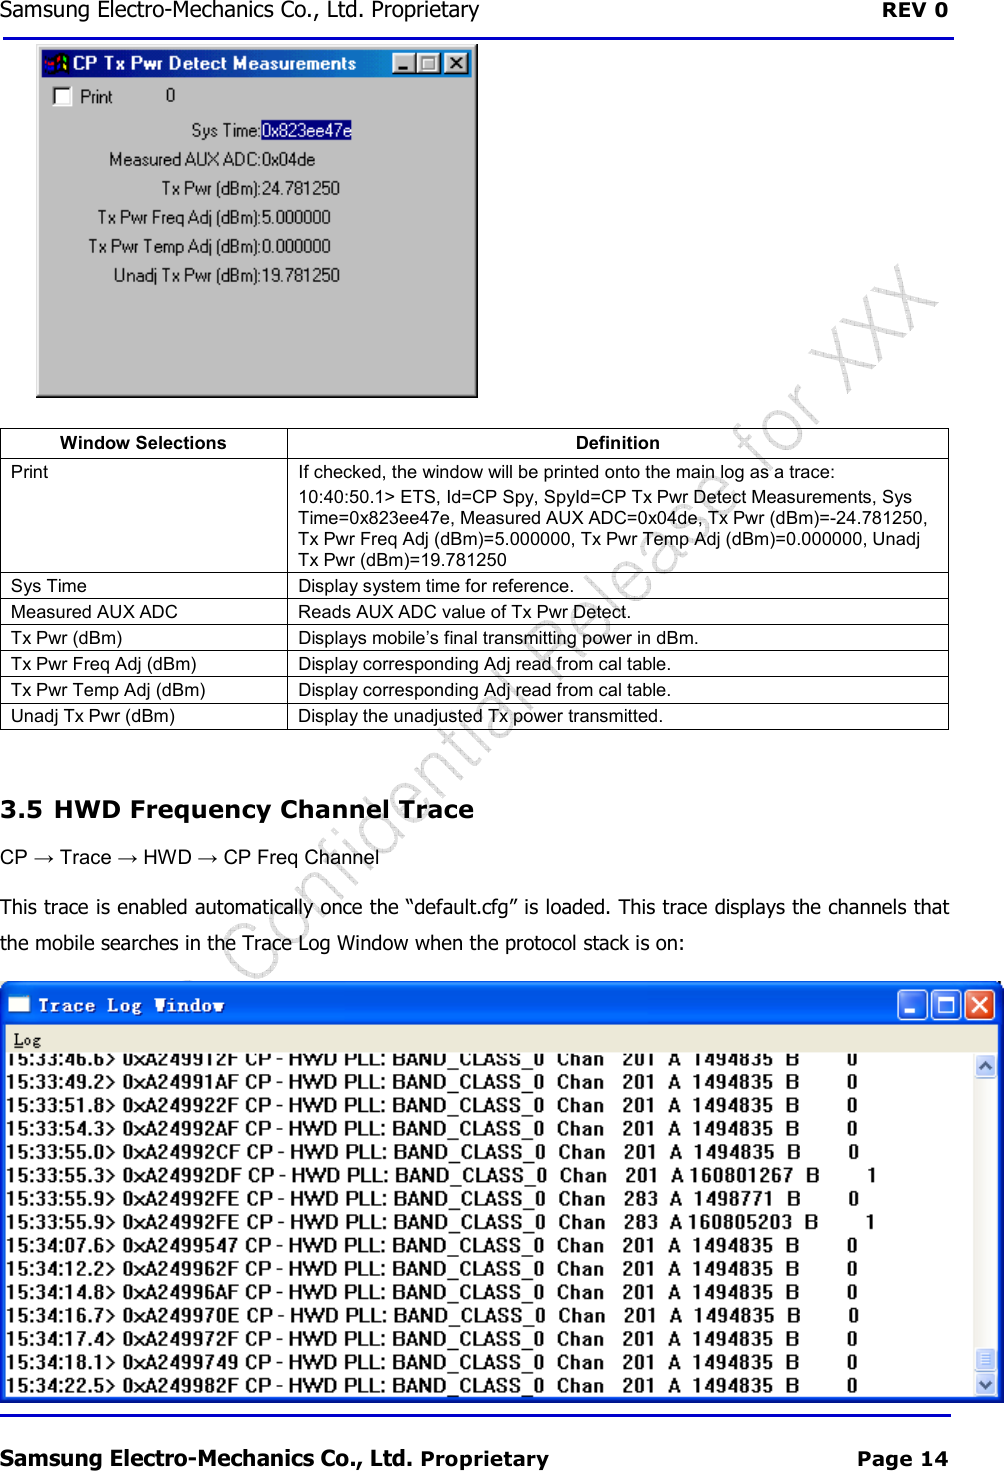 Samsung Electro-Mechanics Co., Ltd. Proprietary  REV 0 Samsung Electro-Mechanics Co., Ltd. Proprietary  Page 14  Window Selections  Definition Print  If checked, the window will be printed onto the main log as a trace: 10:40:50.1&gt; ETS, Id=CP Spy, SpyId=CP Tx Pwr Detect Measurements, Sys Time=0x823ee47e, Measured AUX ADC=0x04de, Tx Pwr (dBm)=-24.781250, Tx Pwr Freq Adj (dBm)=5.000000, Tx Pwr Temp Adj (dBm)=0.000000, Unadj Tx Pwr (dBm)=19.781250 Sys Time  Display system time for reference. Measured AUX ADC  Reads AUX ADC value of Tx Pwr Detect. Tx Pwr (dBm)  Displays mobile’s final transmitting power in dBm. Tx Pwr Freq Adj (dBm)  Display corresponding Adj read from cal table. Tx Pwr Temp Adj (dBm)  Display corresponding Adj read from cal table. Unadj Tx Pwr (dBm)  Display the unadjusted Tx power transmitted.  3.5  HWD Frequency Channel Trace CP → Trace → HWD → CP Freq Channel This trace is enabled automatically once the “default.cfg” is loaded. This trace displays the channels that the mobile searches in the Trace Log Window when the protocol stack is on:  